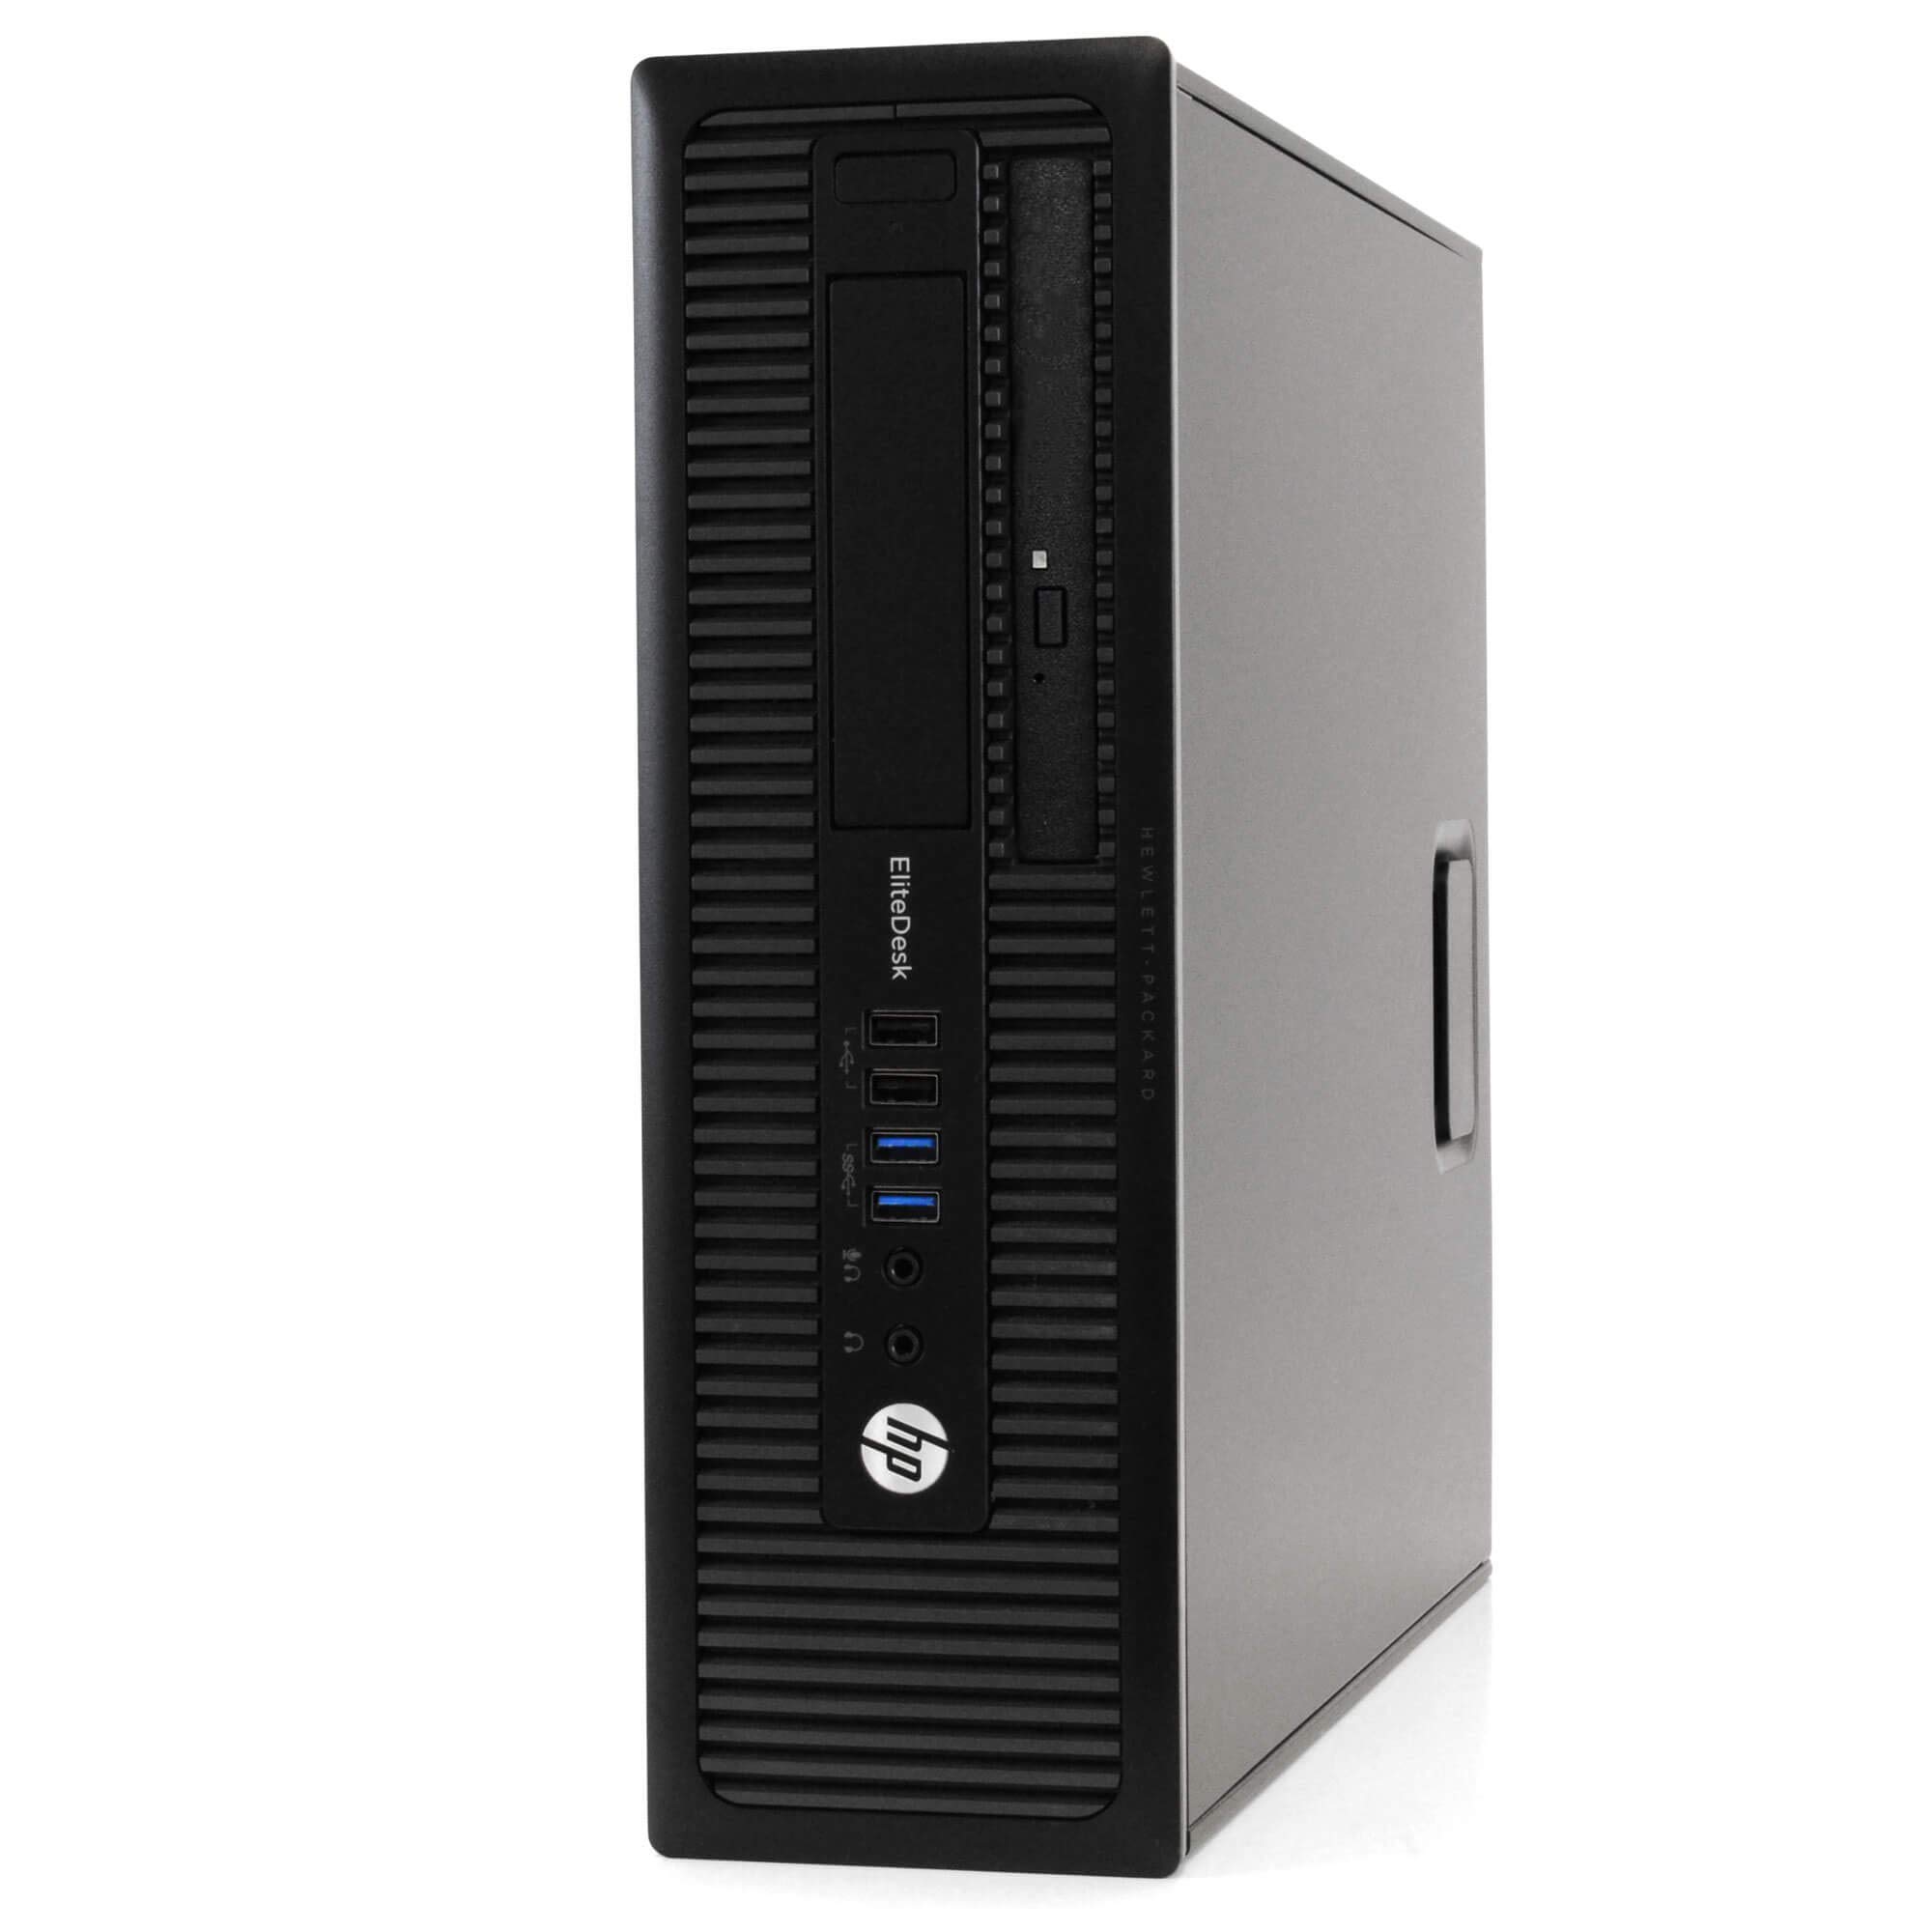 HP EliteDesk 800G1 Small Desktop Computer (SFF) | Quad Core Intel i5 (3.6GHz (Turbo)) | 16GB DDR3 RAM | 240GB SSD Solid State + 1TB HDD | Windows 10 Pro | Home or Office PC (Renewed)